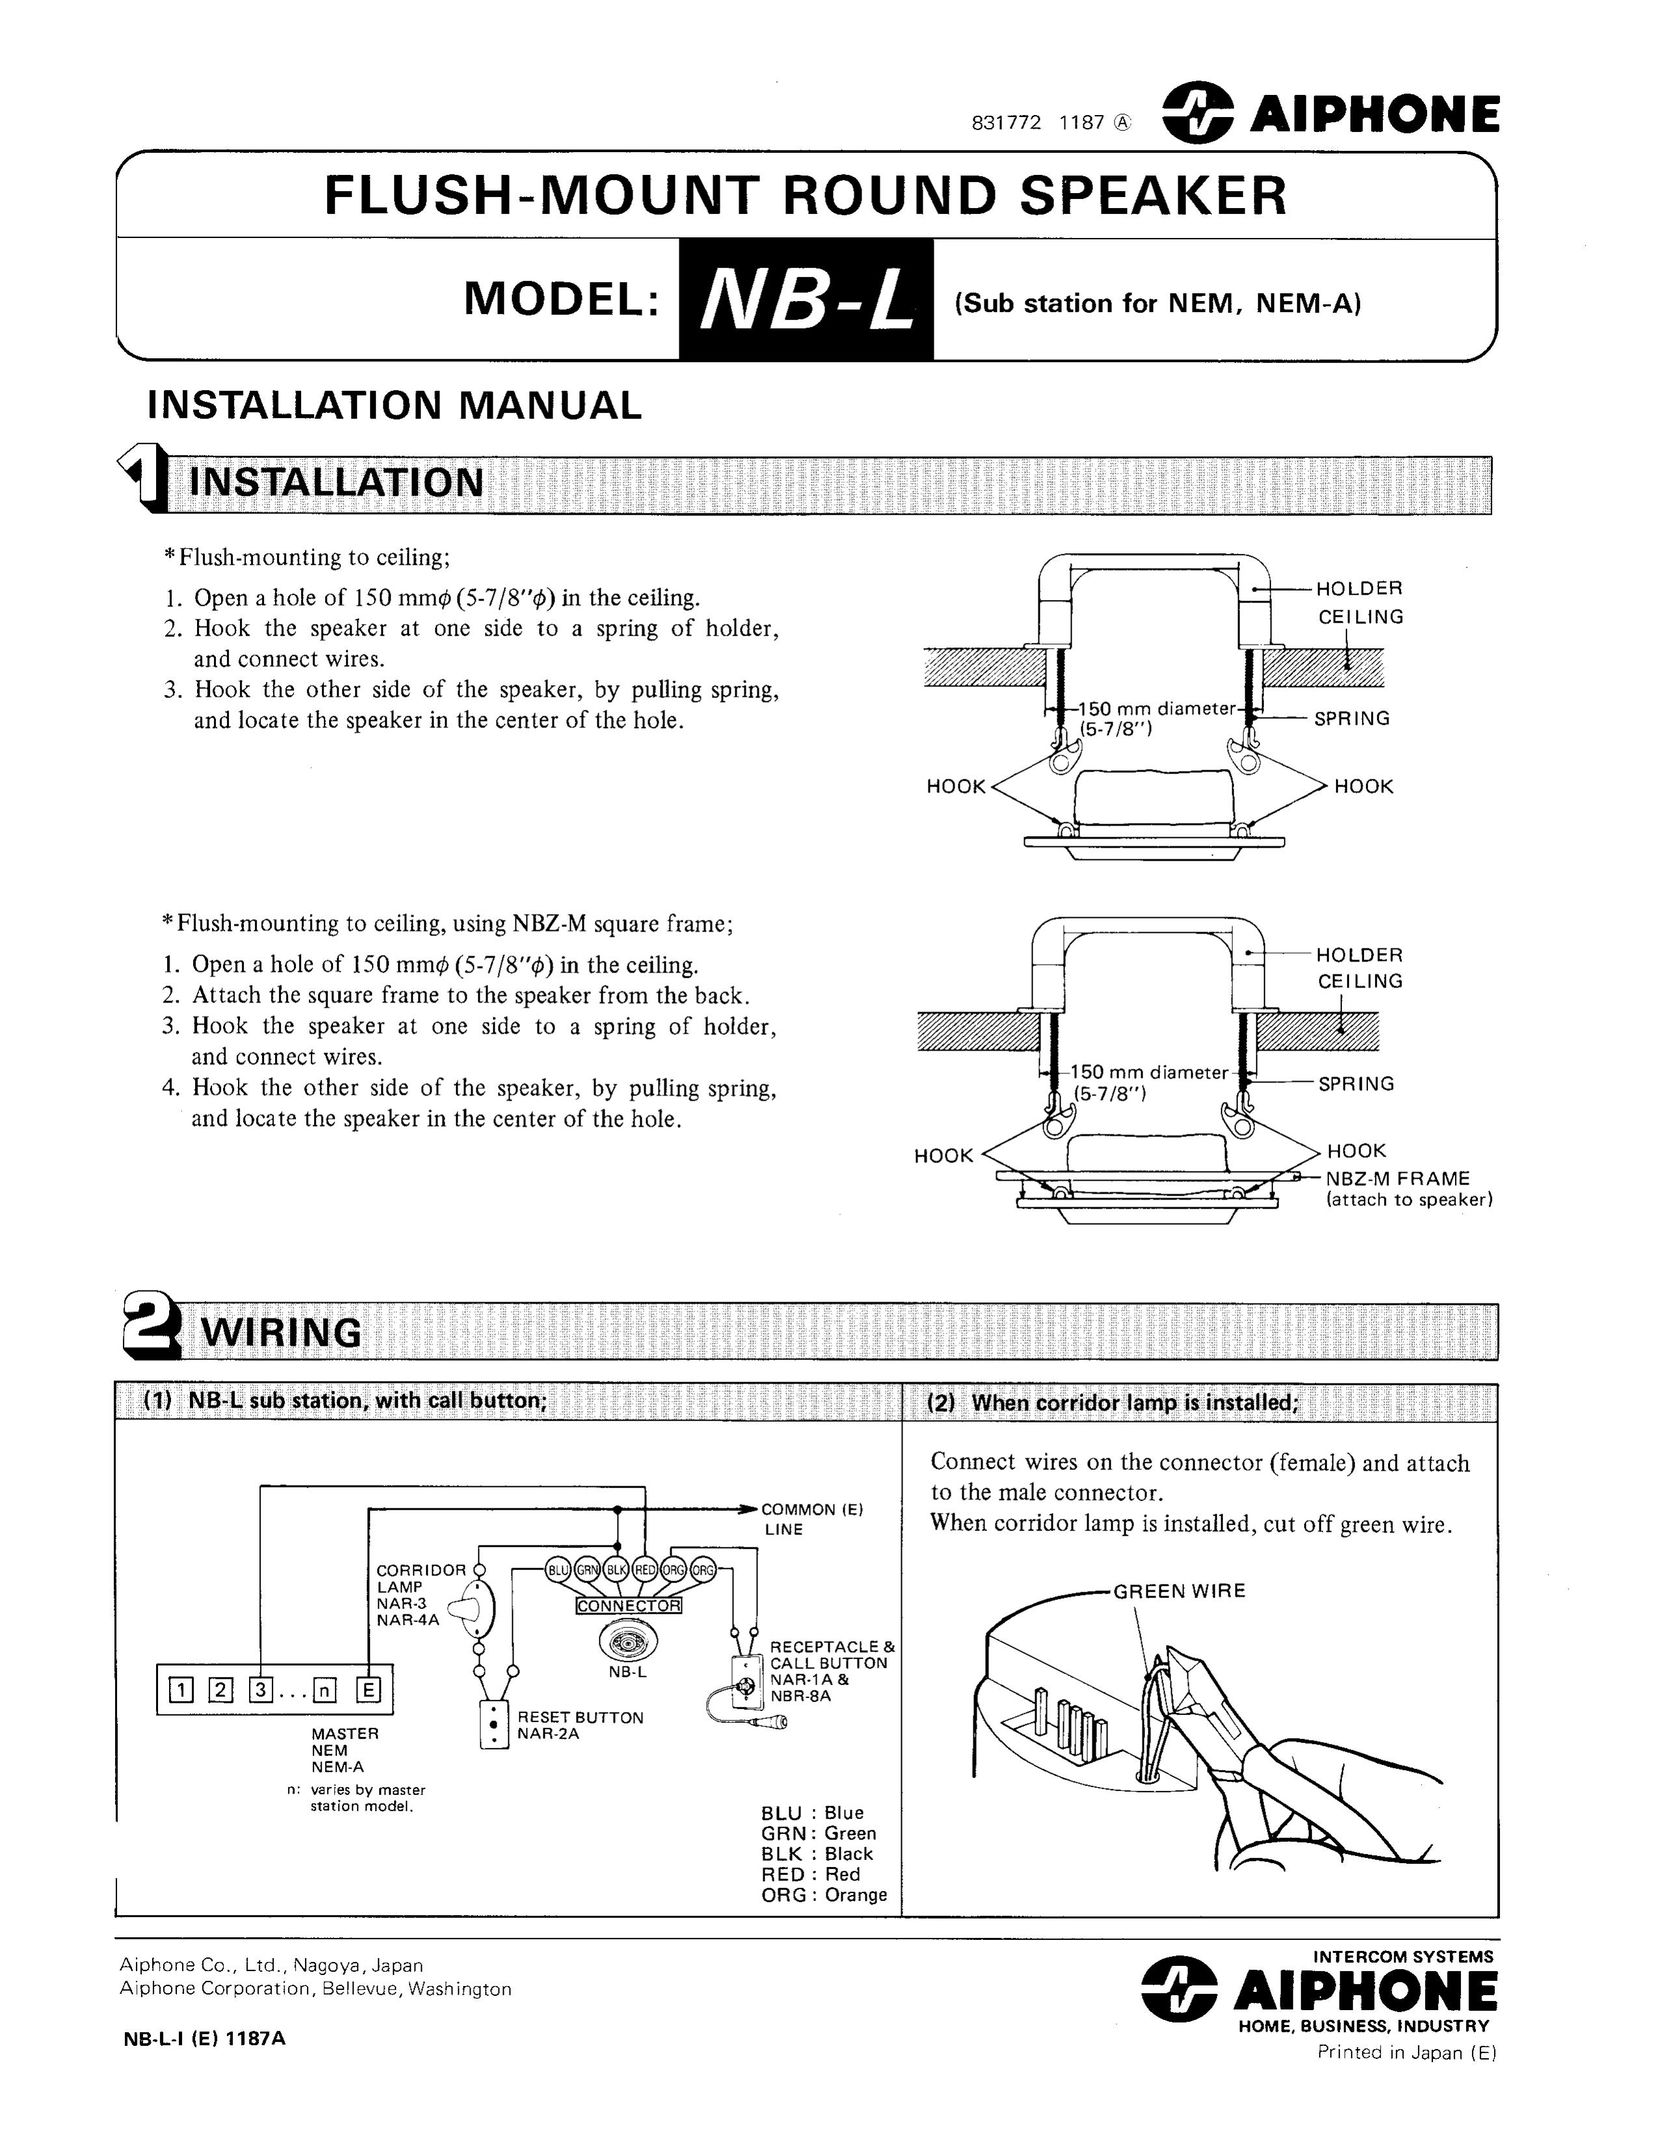 Aiphone nb-l Home Theater System User Manual